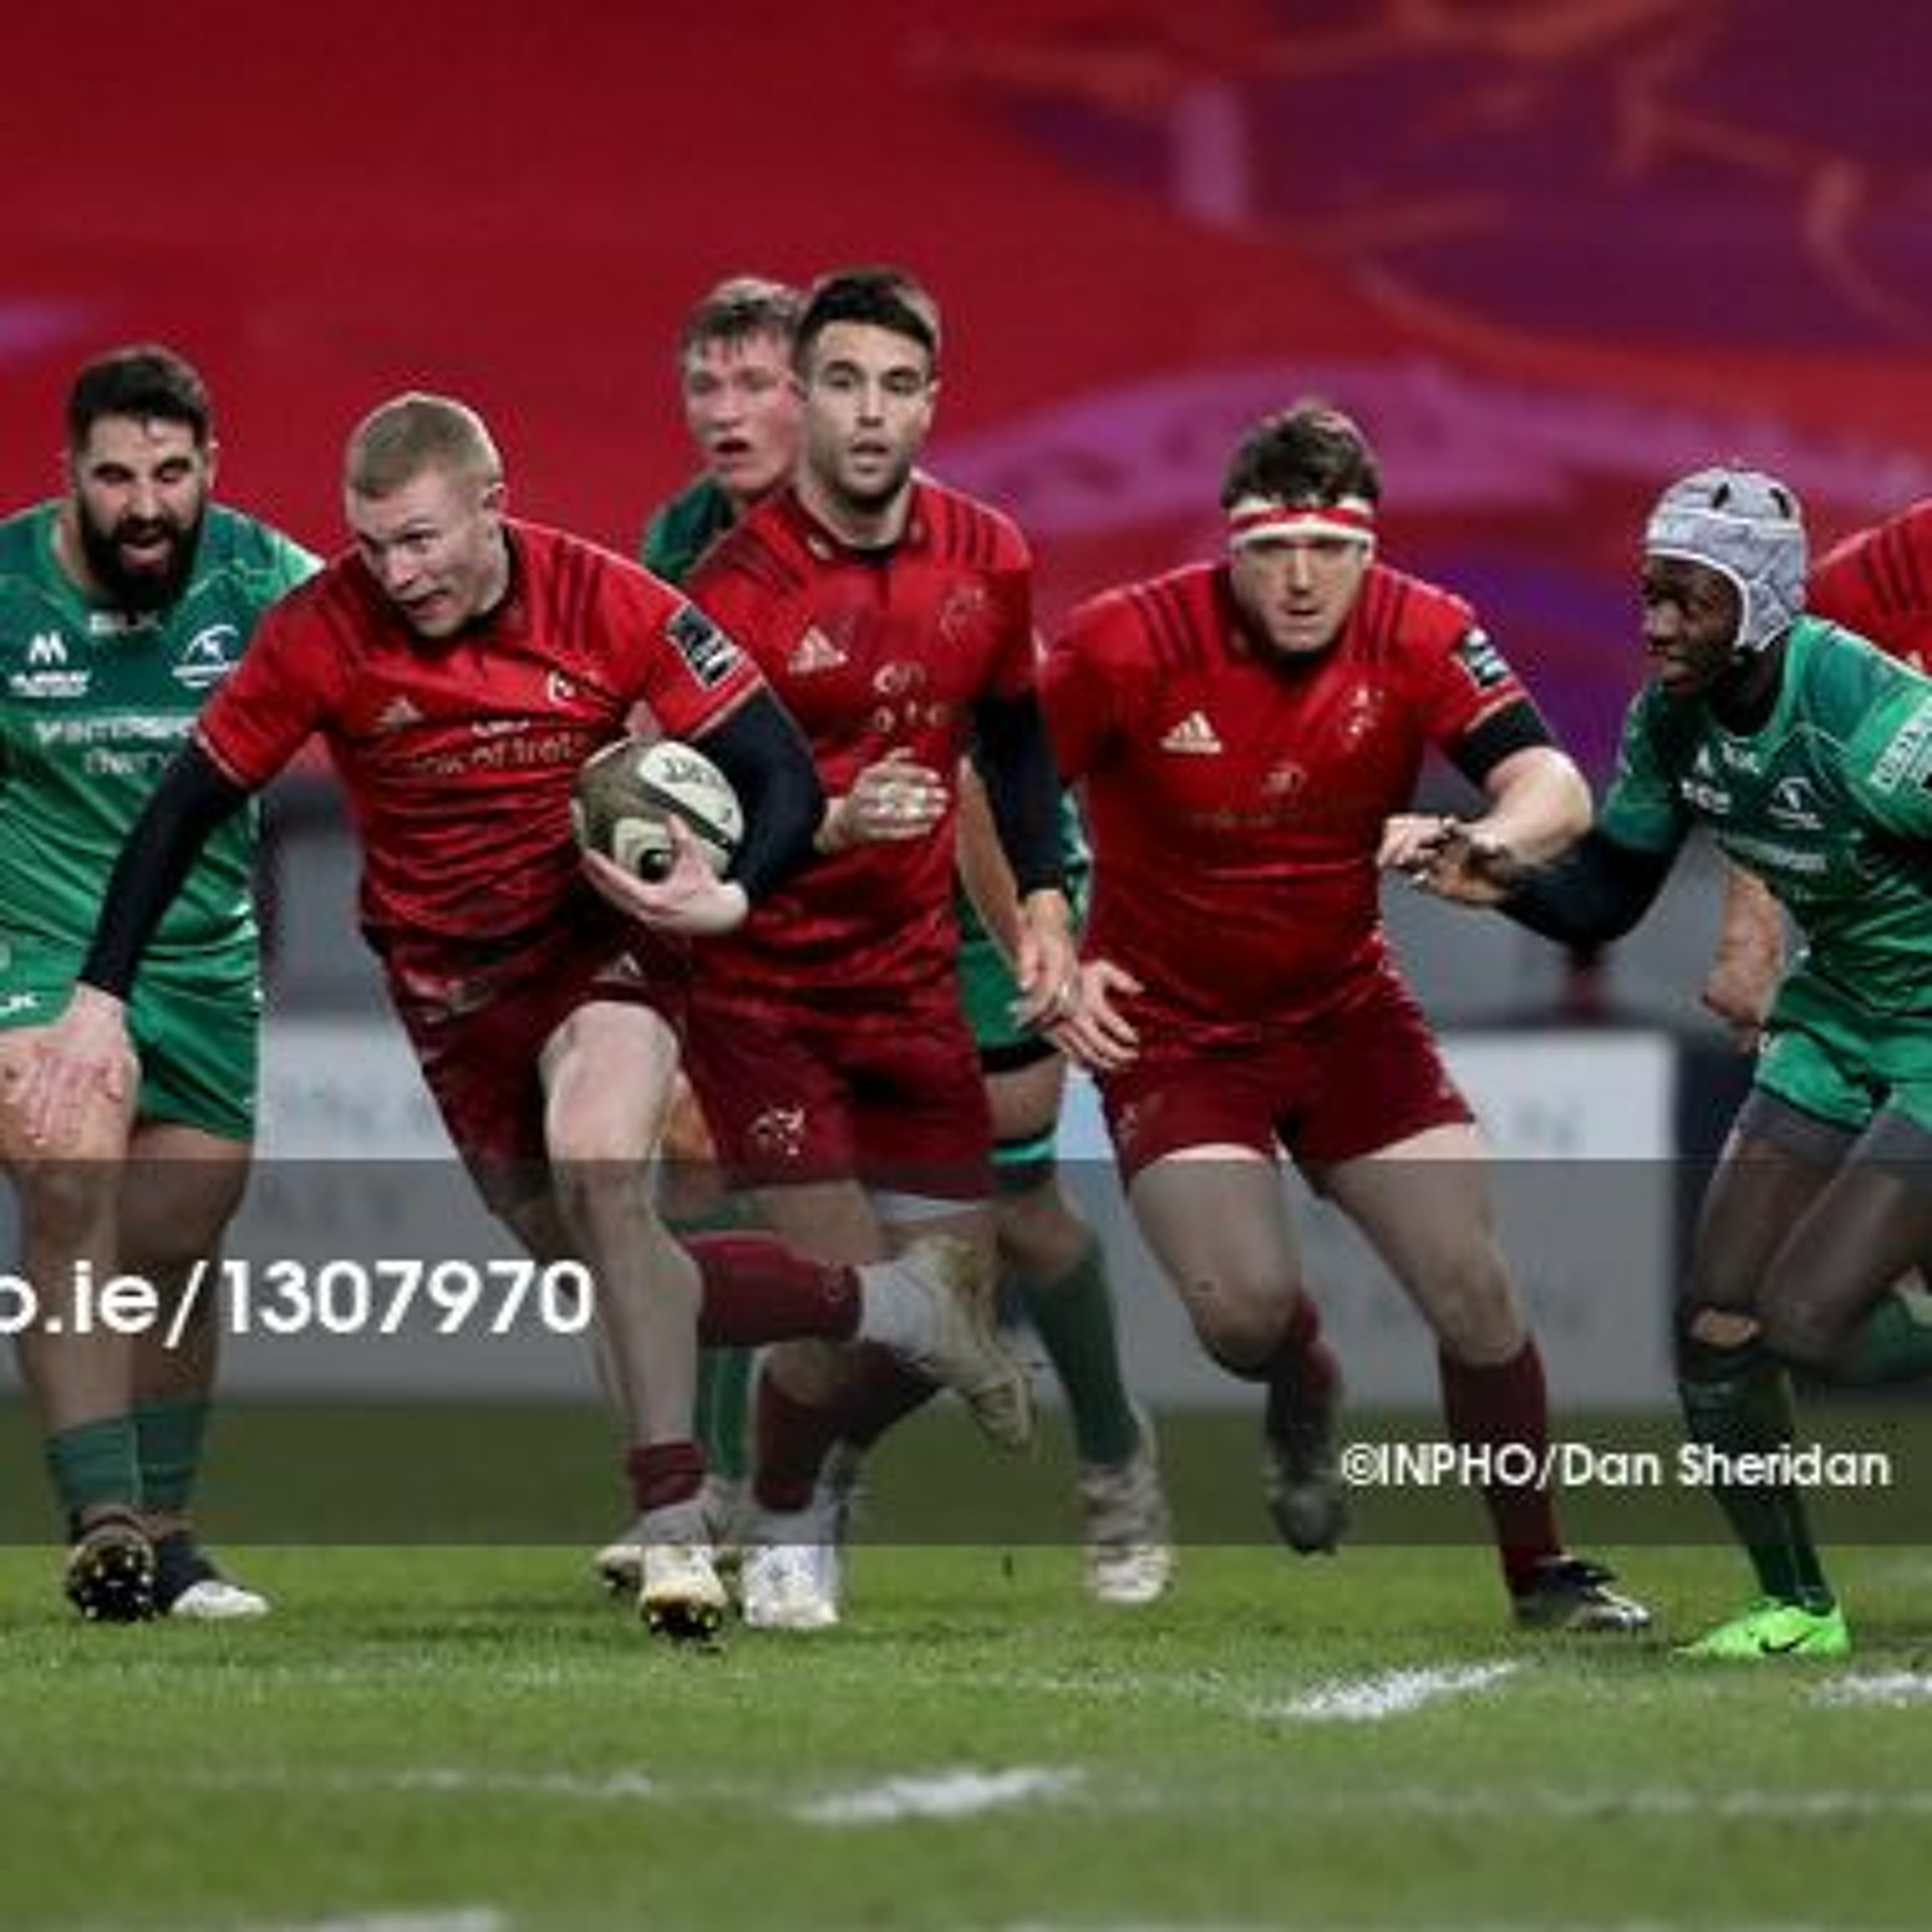 Callow Connacht Munched by Munster - Craggy Rugby podcast